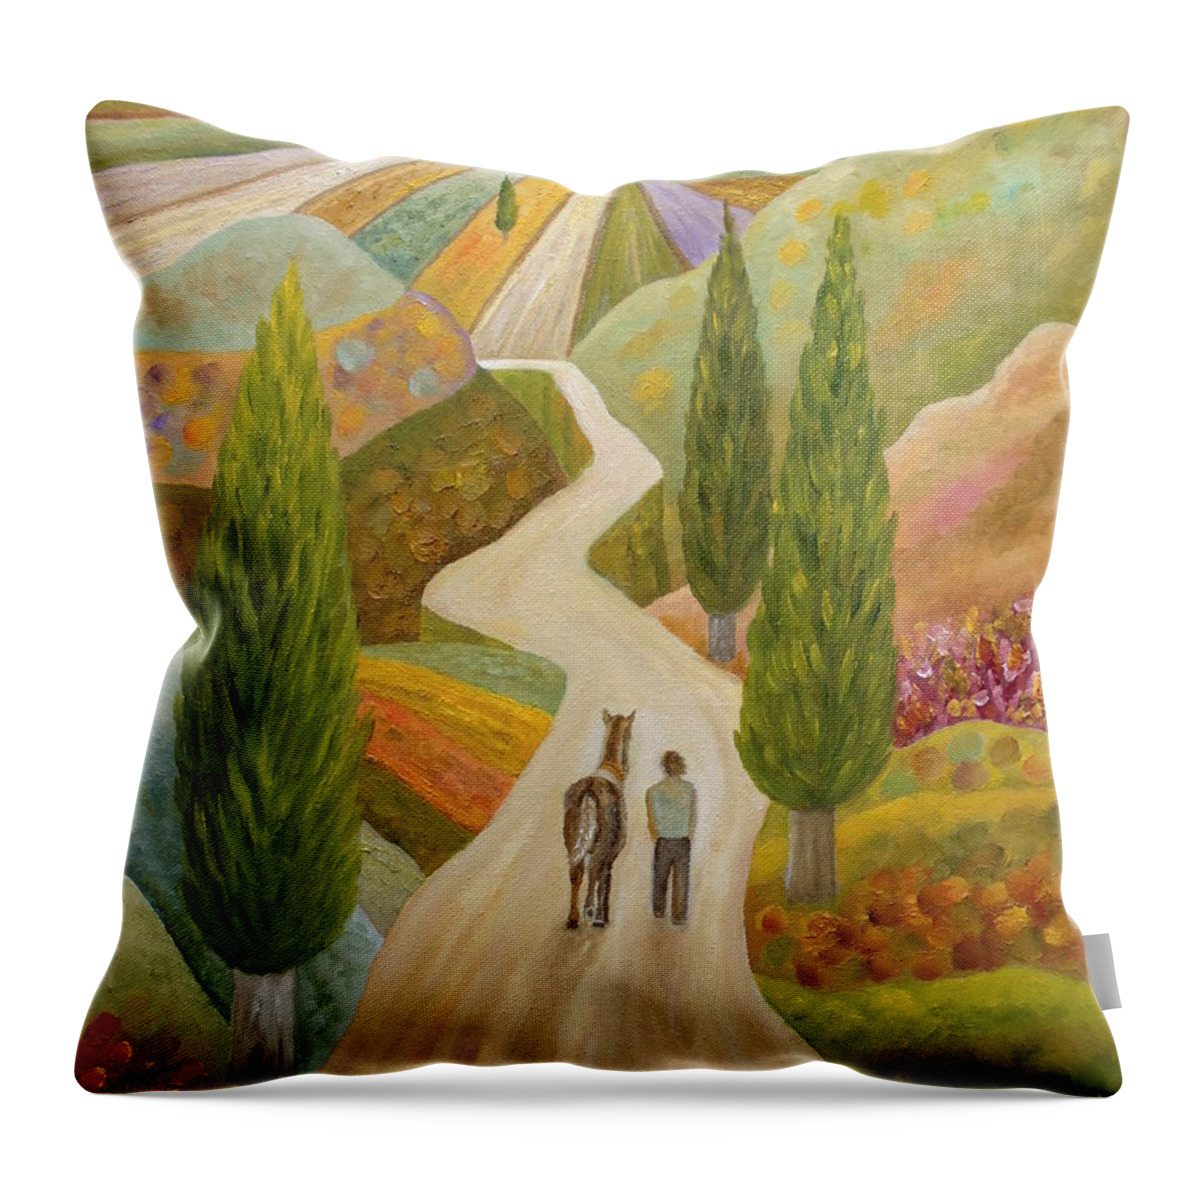 Cypress Throw Pillow featuring the painting Good Old Friends by Angeles M Pomata